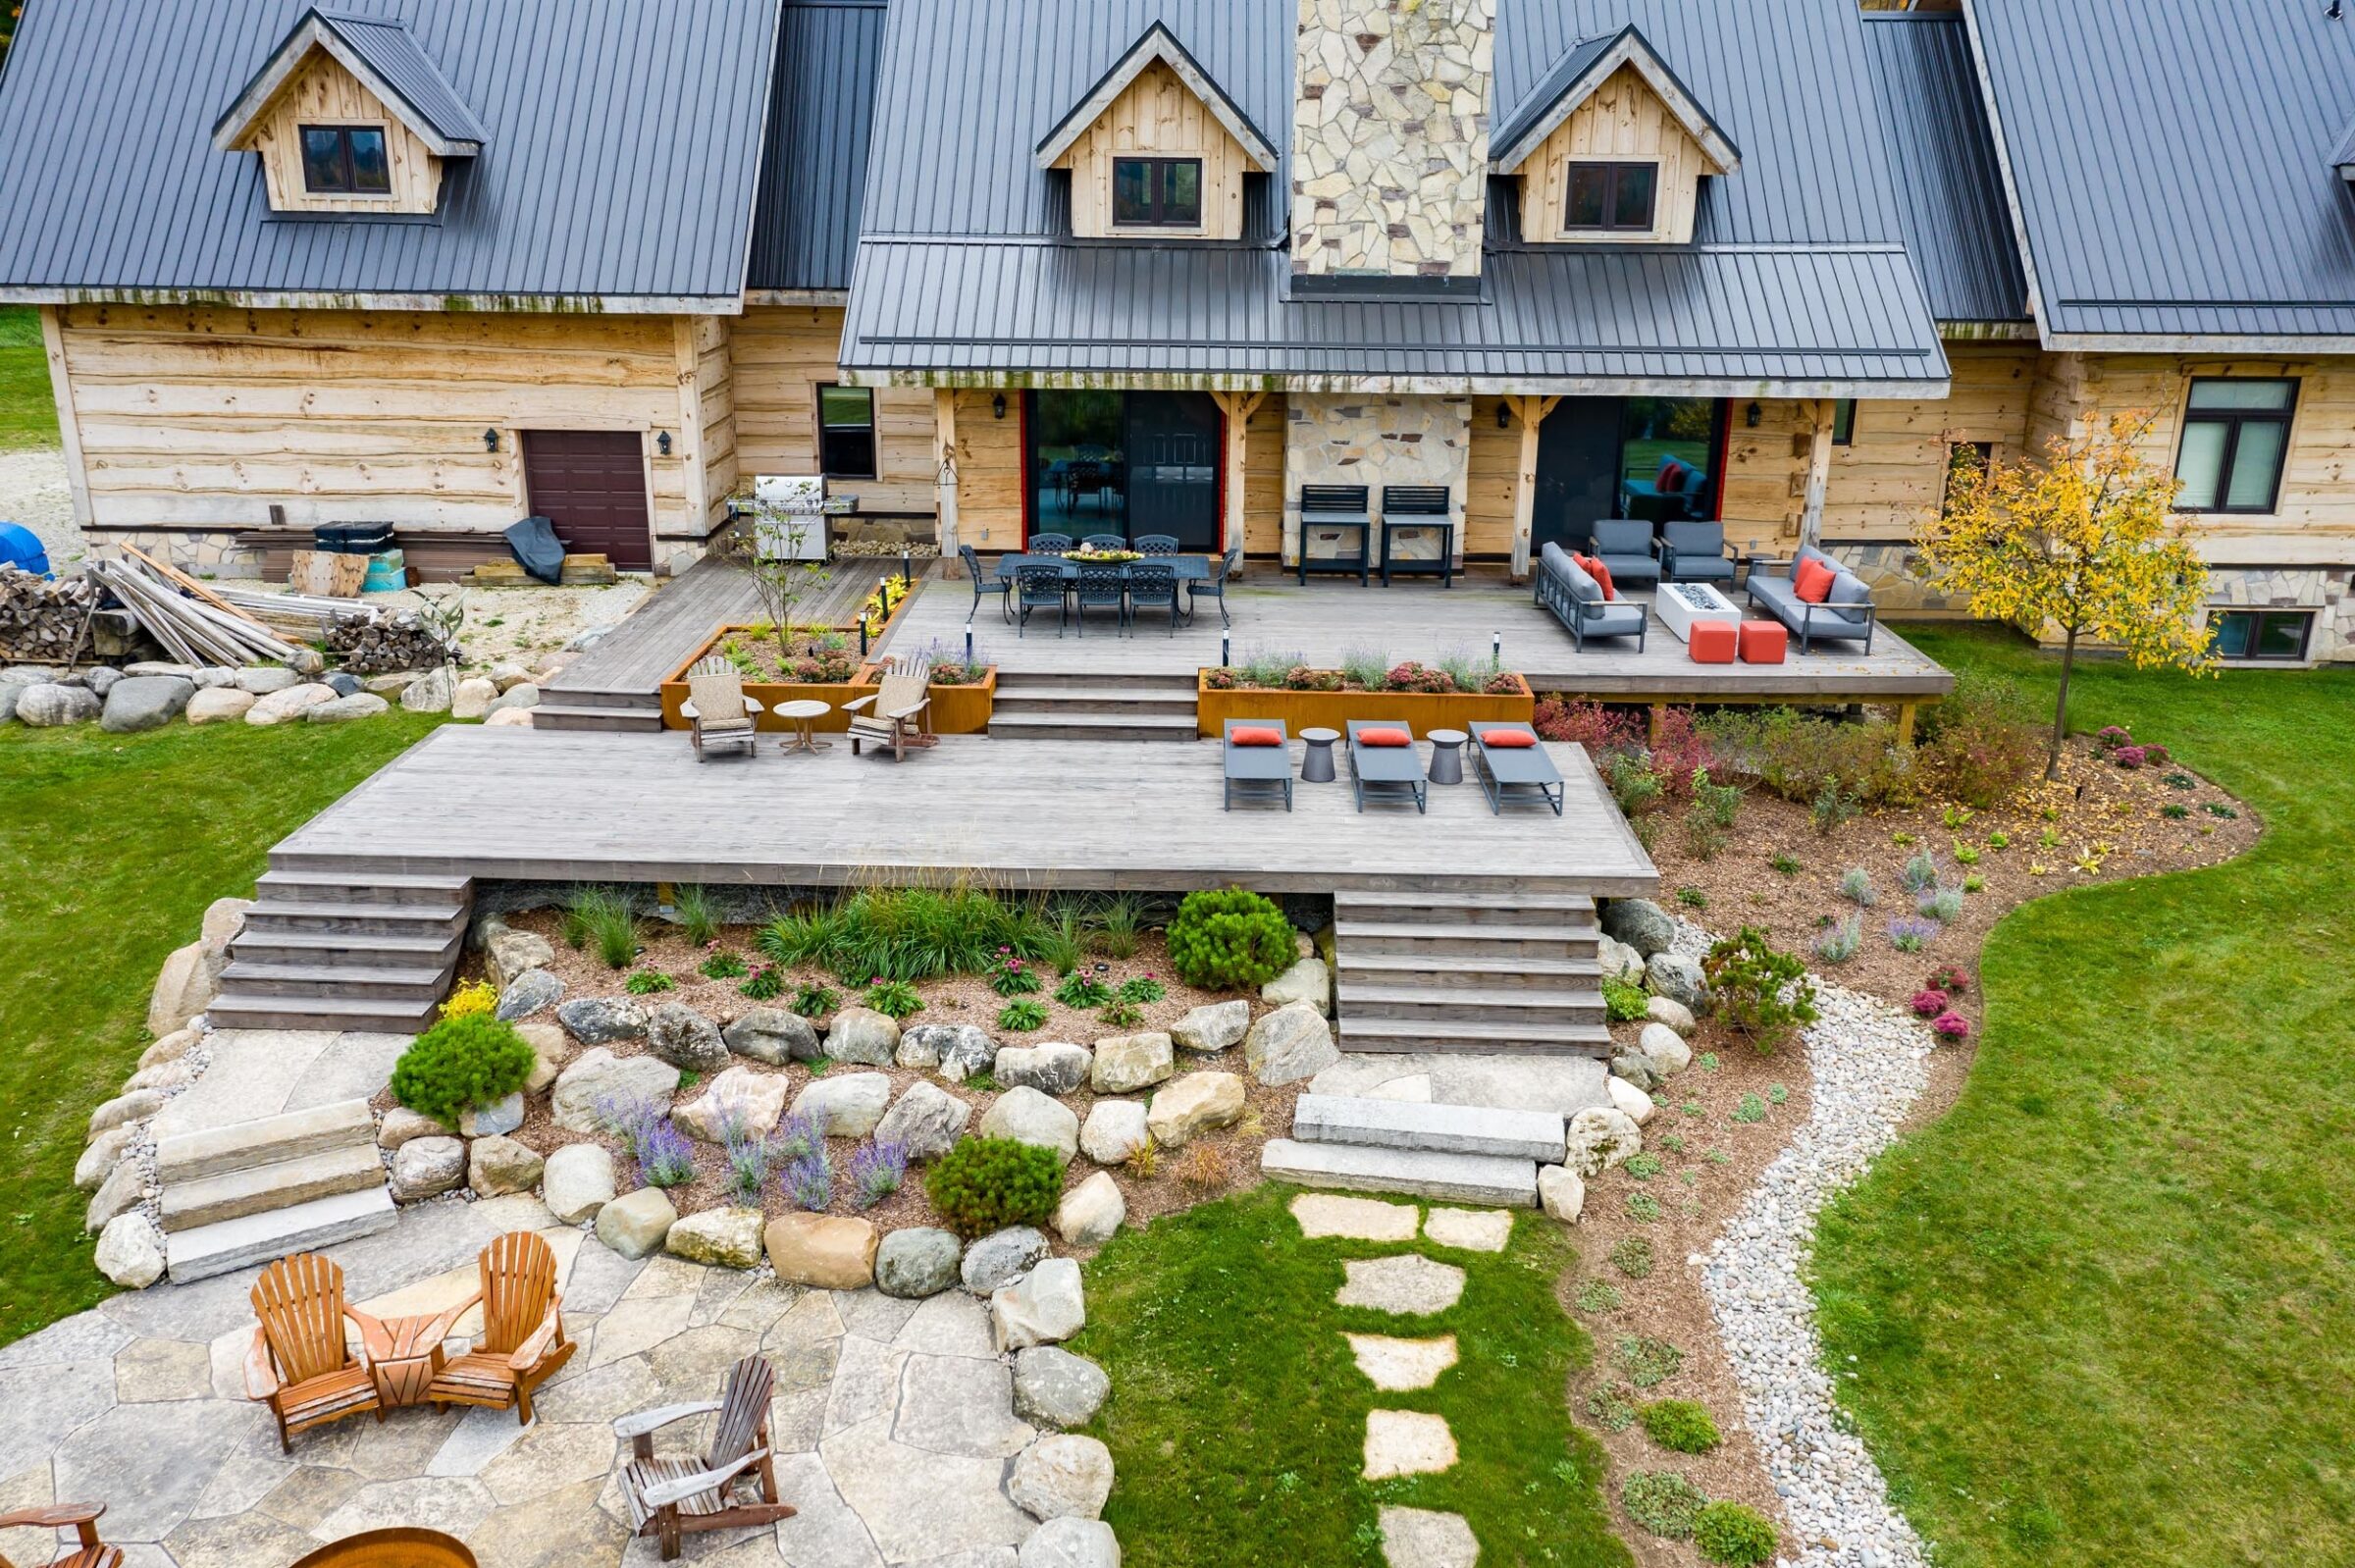 Aerial view of a stone and wood house with a terraced garden, outdoor seating areas, a lawn path, and a fire pit surrounded by Adirondack chairs.